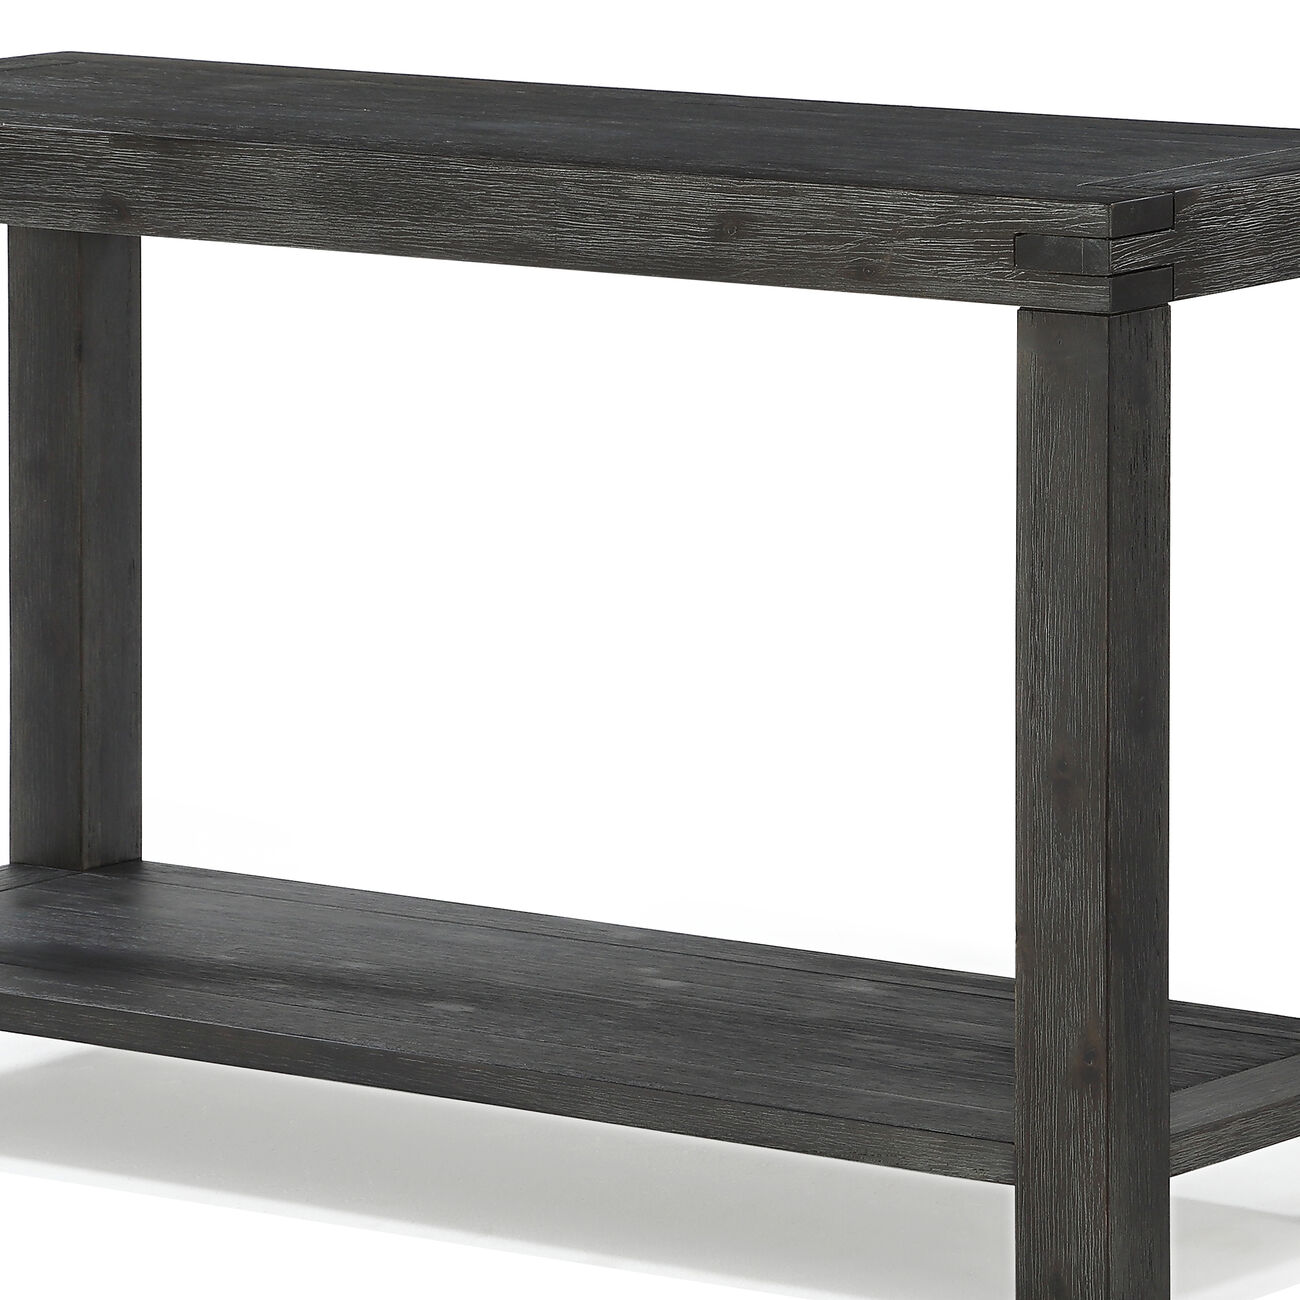 Wooden Console Table with Block Legs and Open Shelf, Dark Gray